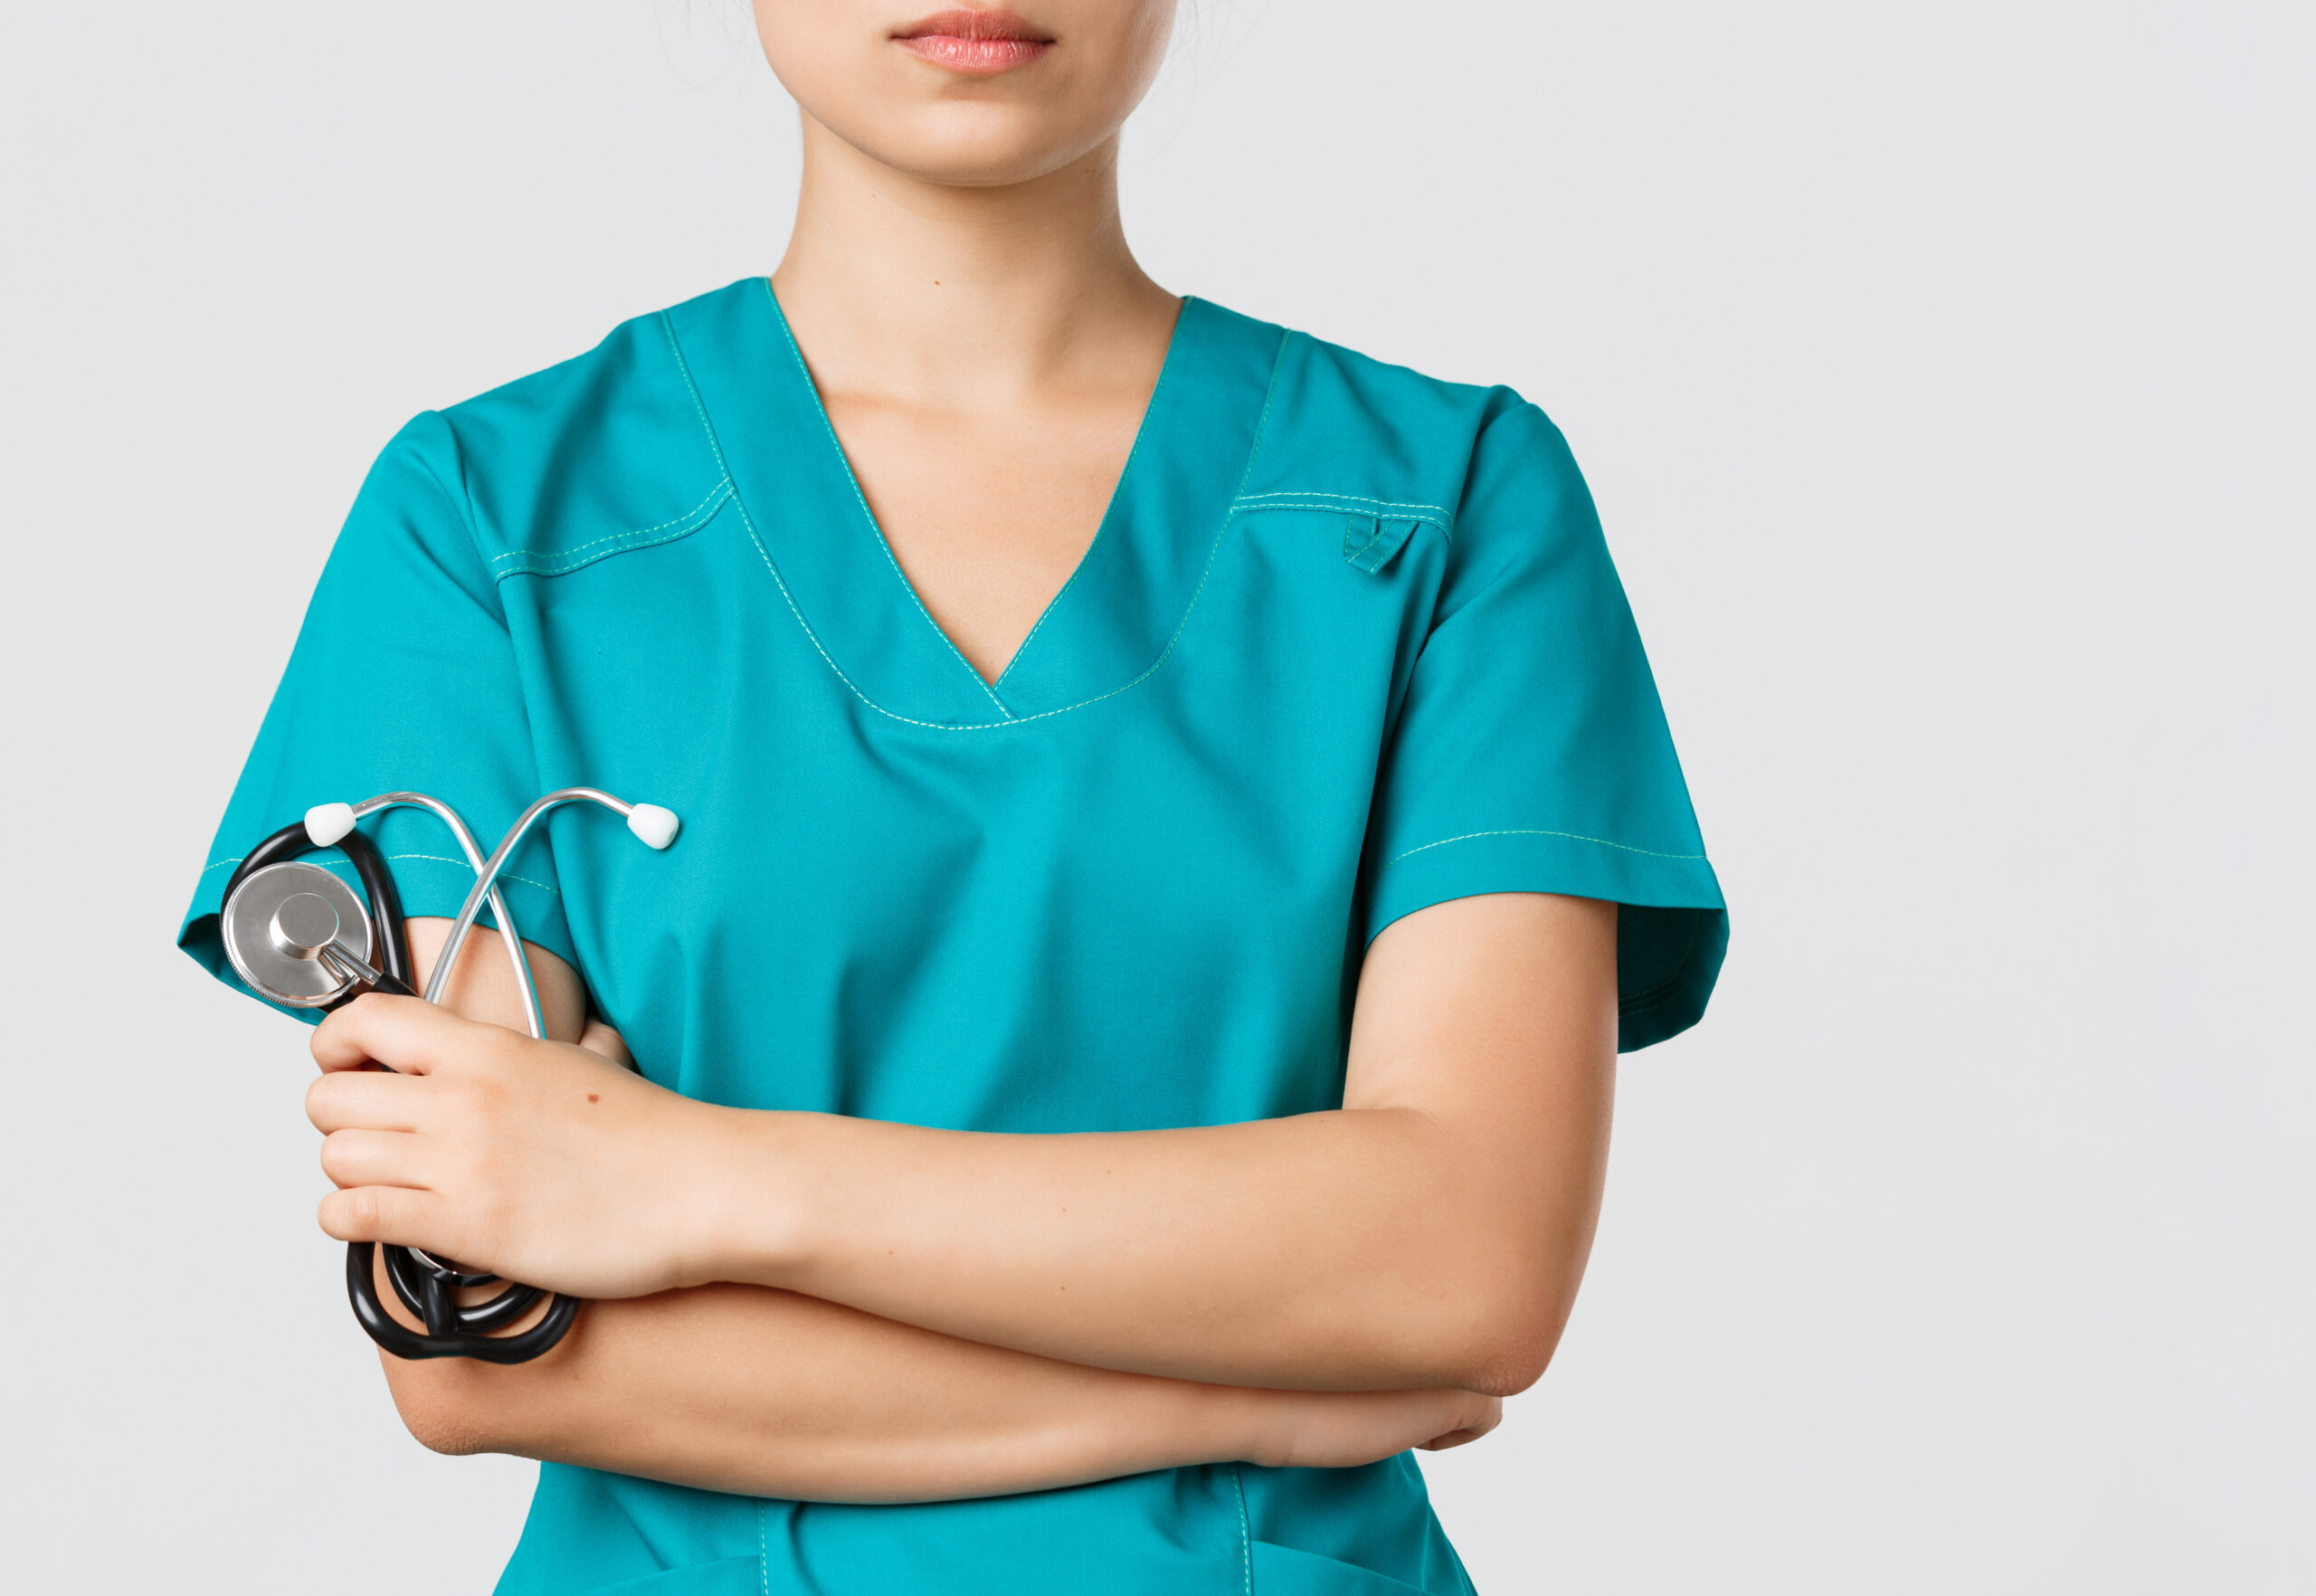 Covid 19, Coronavirus Disease, Healthcare Workers Concept. Close Up Of Confident Female Asian Physician, Doctor In Medical Scrubs, Cross Arms Determined And Holding Stethoscope, White Background